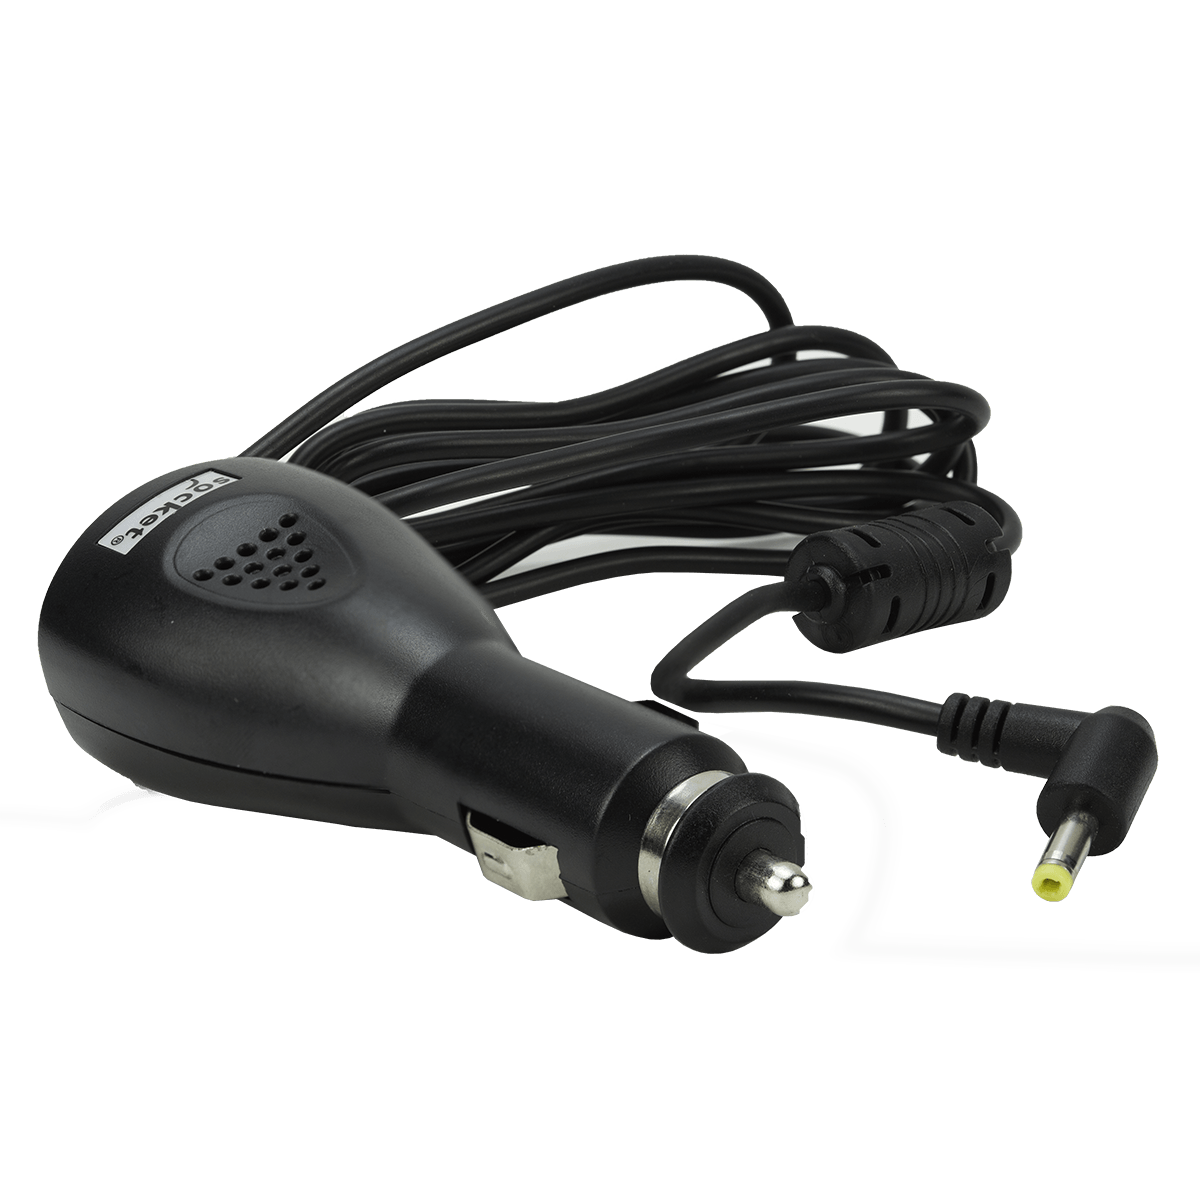 Car Charger, Power DC Socket Retractable - ACF99